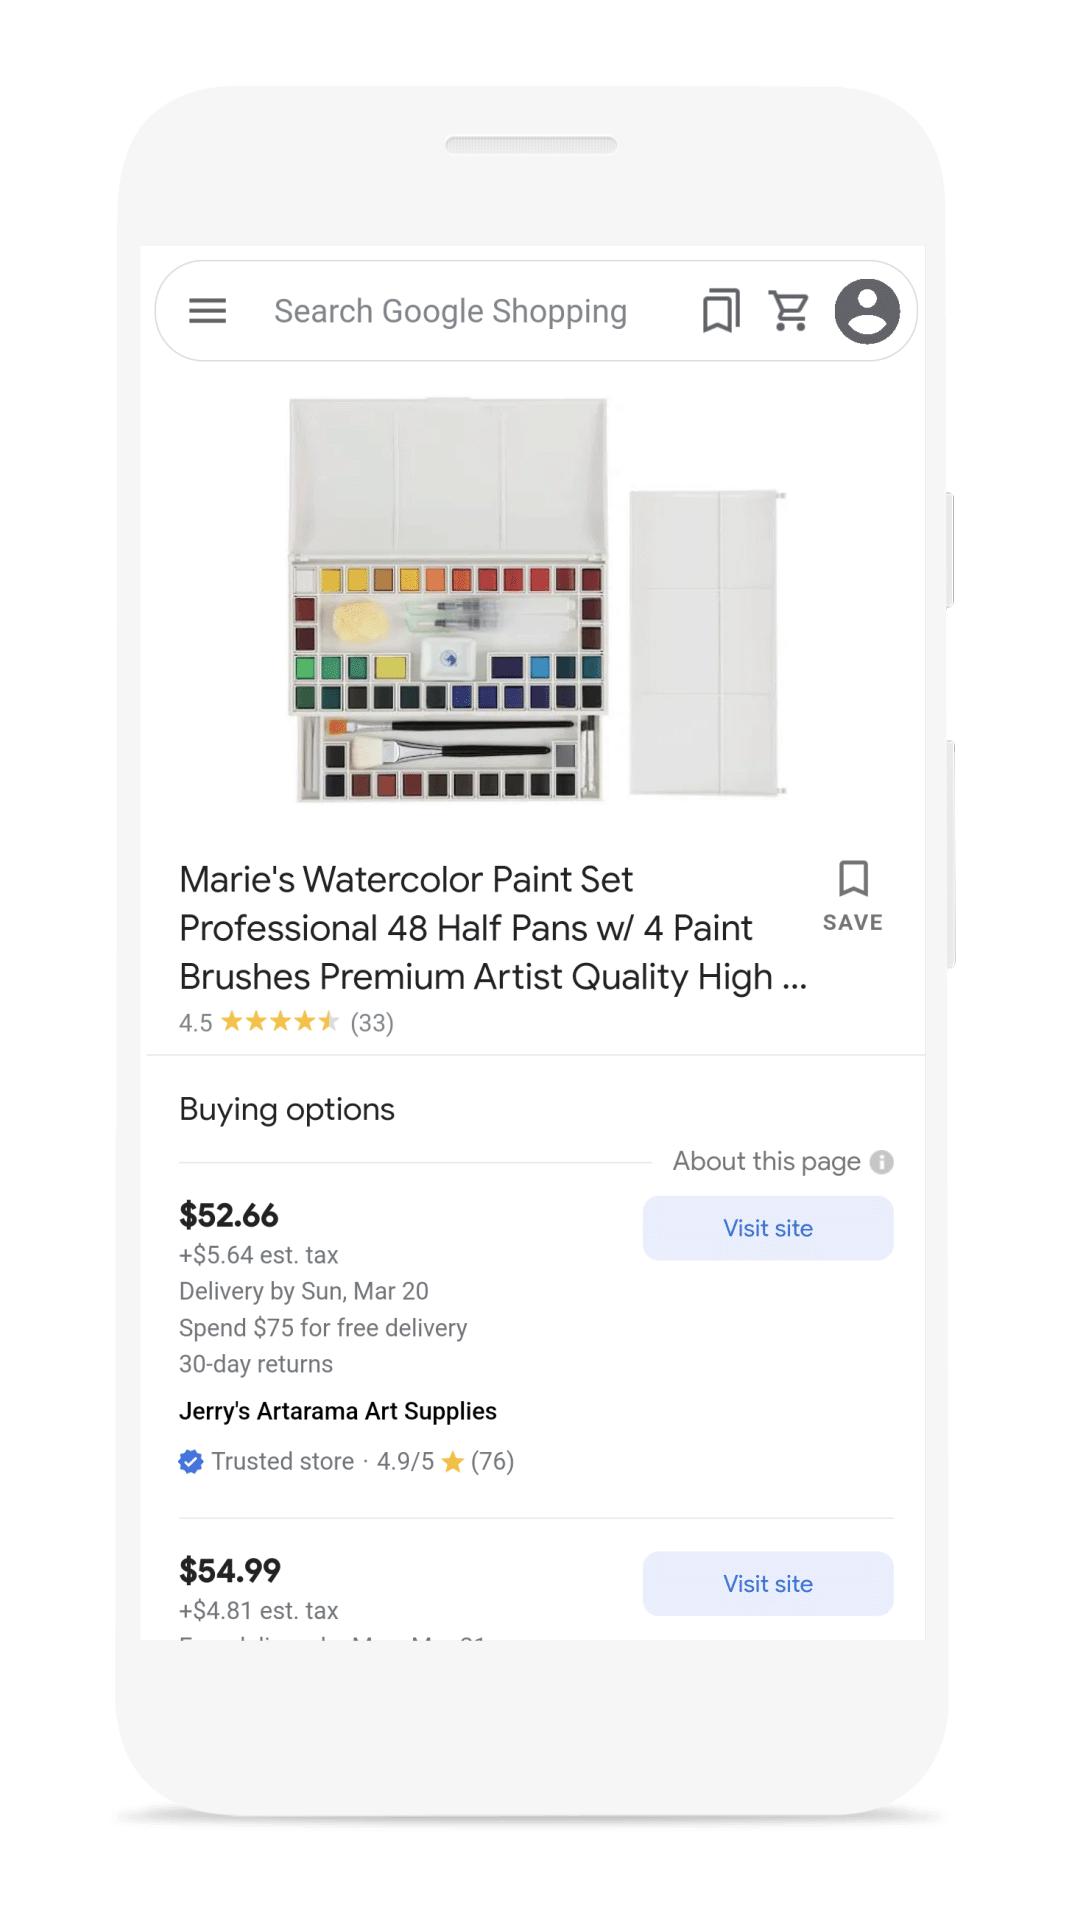 Animation of mobile phone highlighting a "Trusted Store" badge underneath the price of a watercolor paint set on Google Shopping.